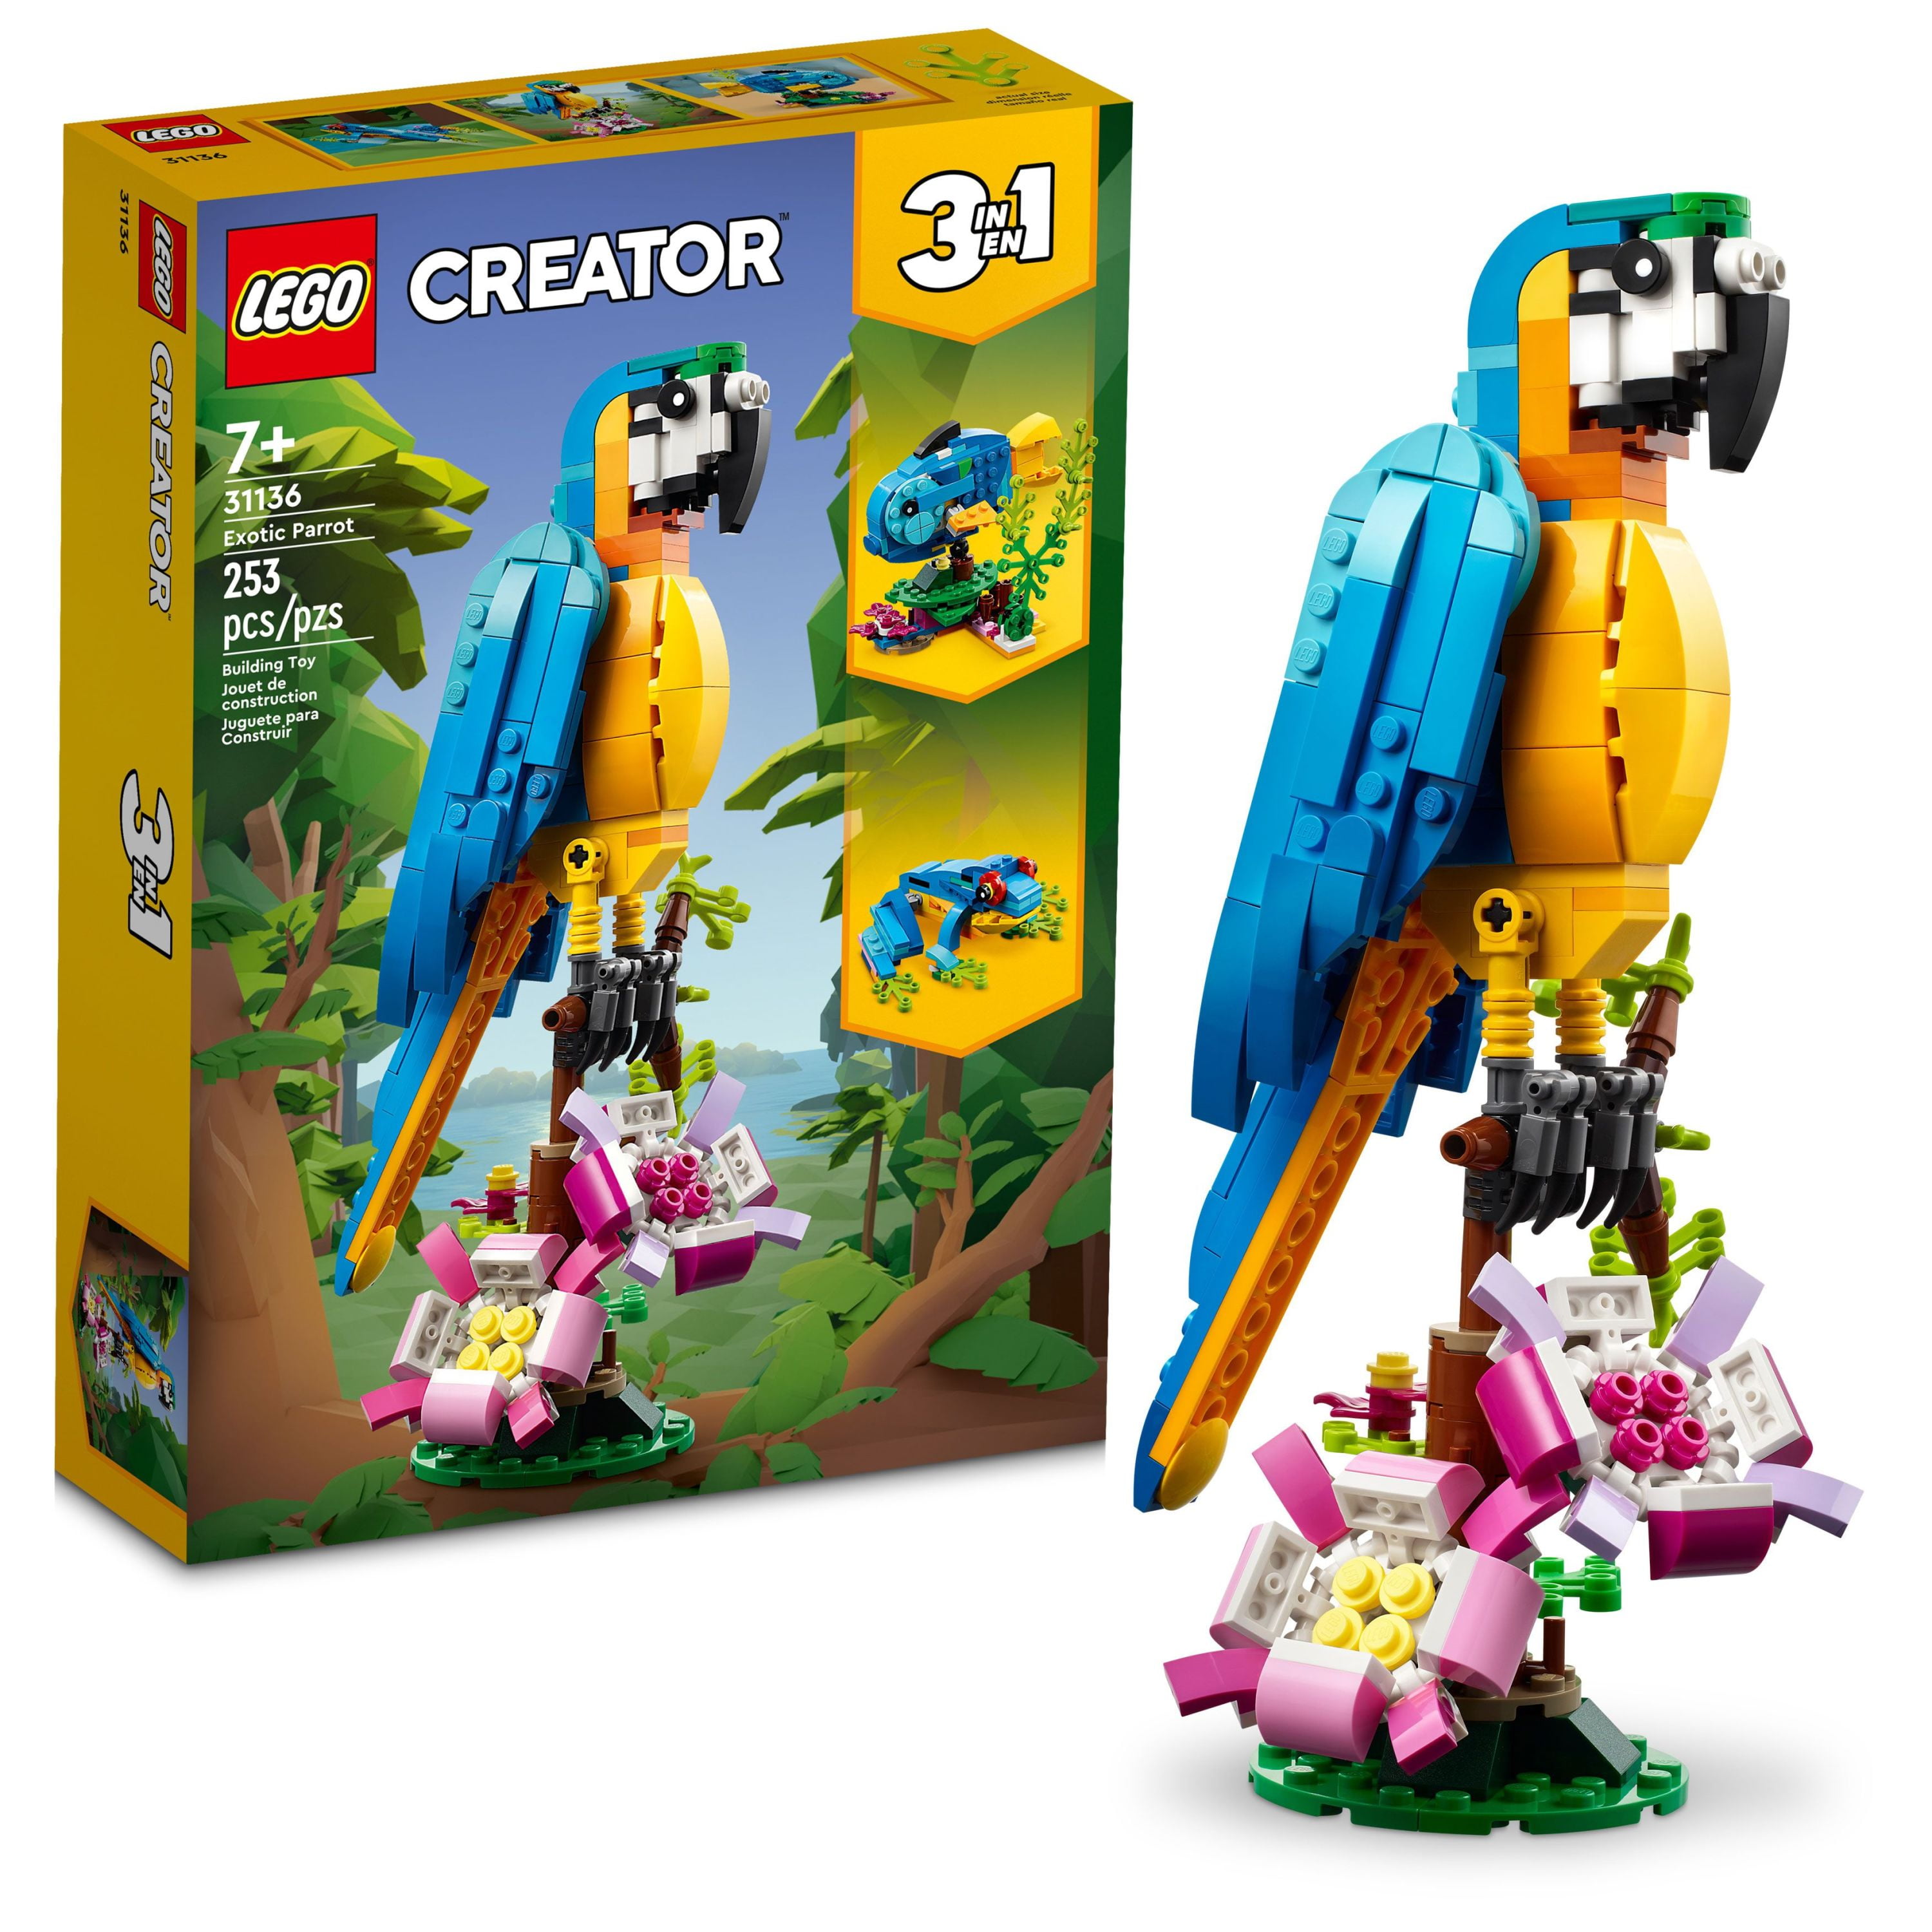 LEGO Creator 3 in 1 Exotic Parrot Building Toy Set, Transforms to